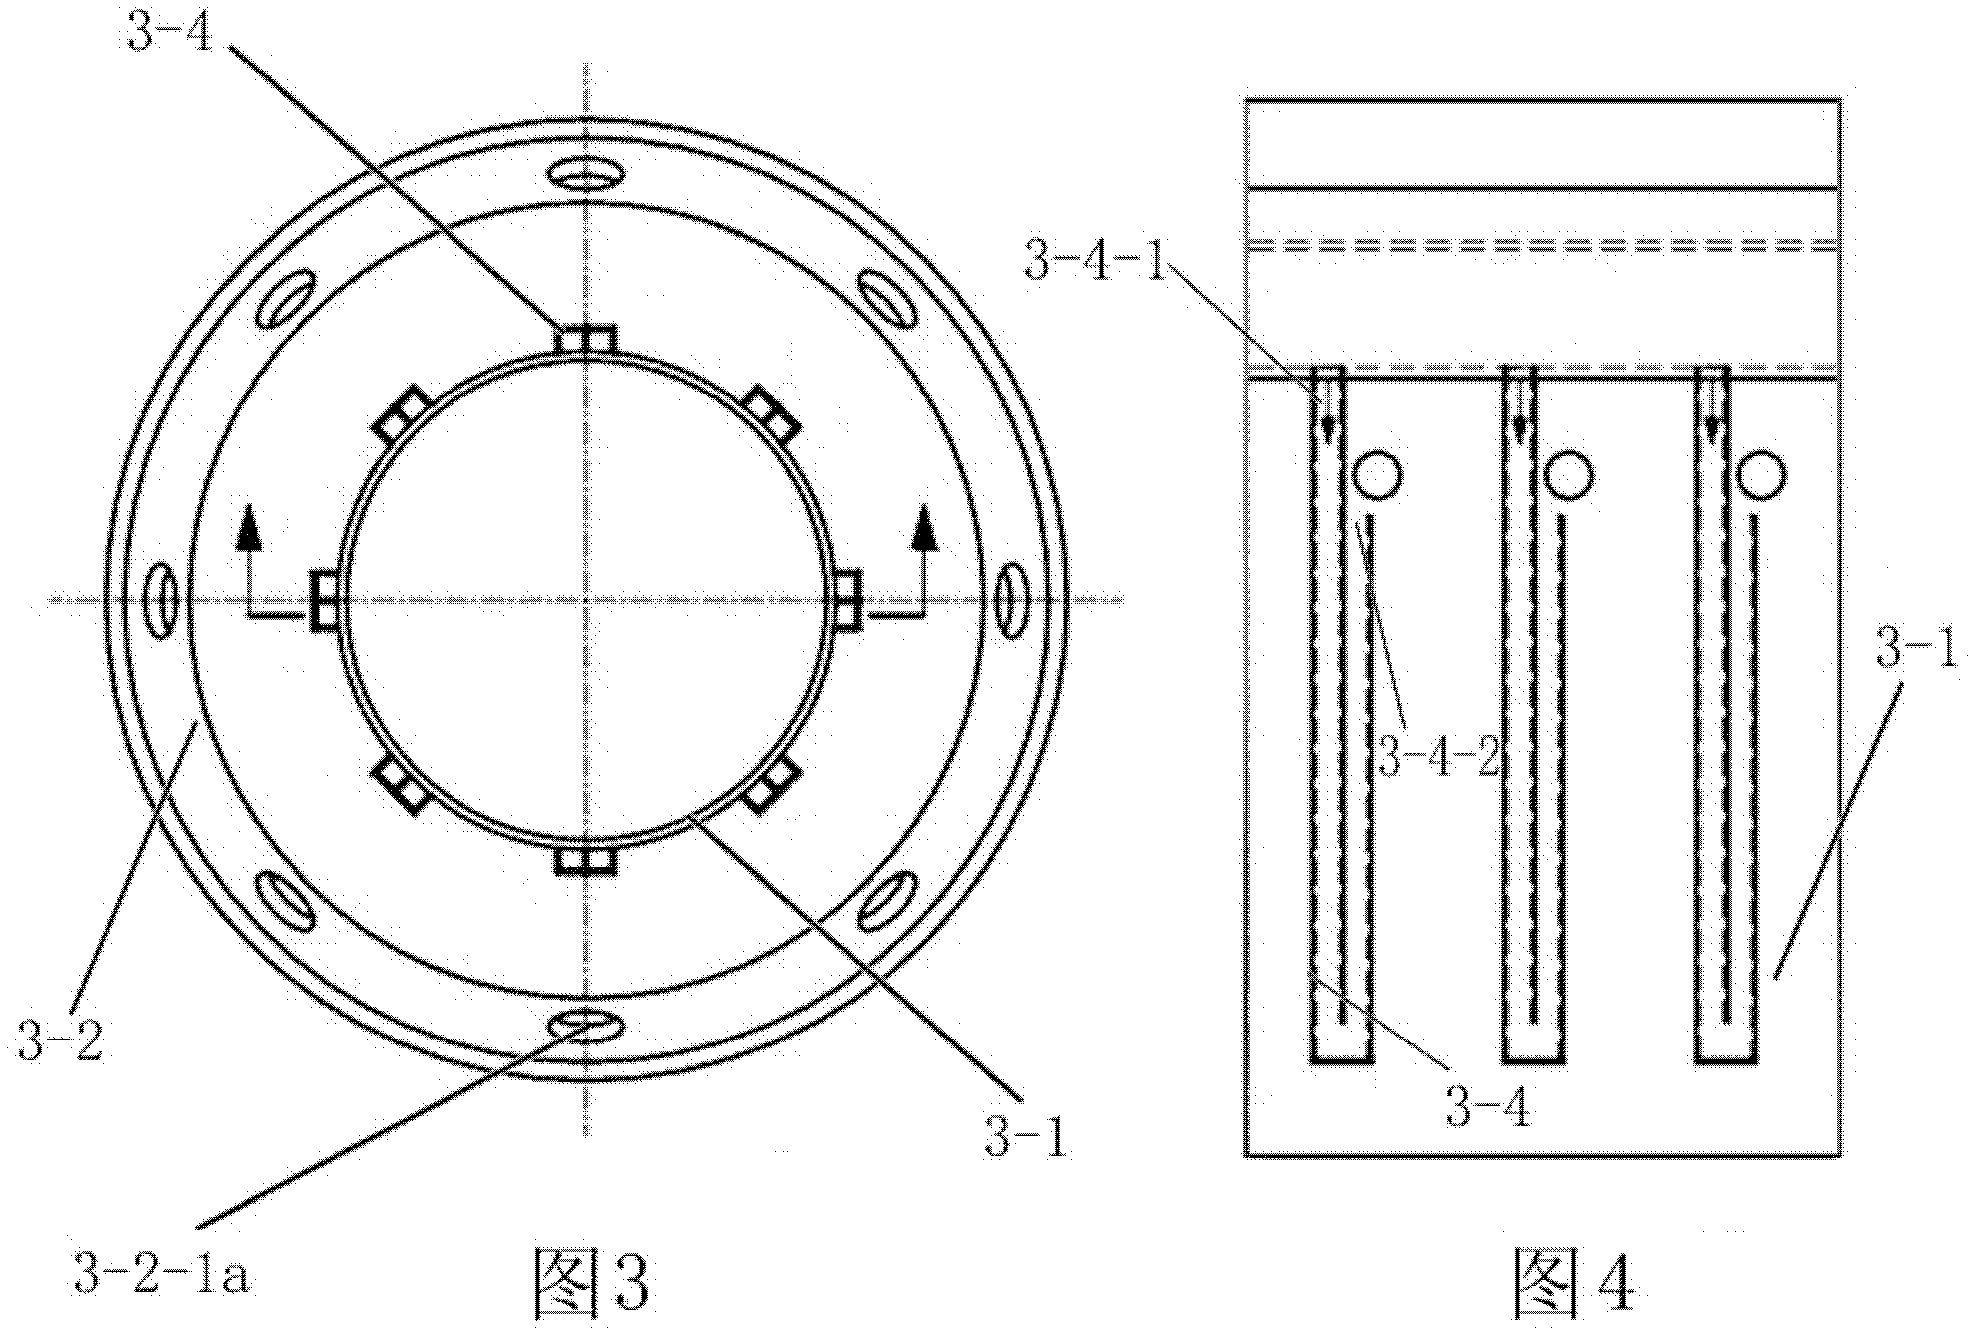 Thermal simulation furnace with heating/cooling controllable structure and capable of sampling halfway